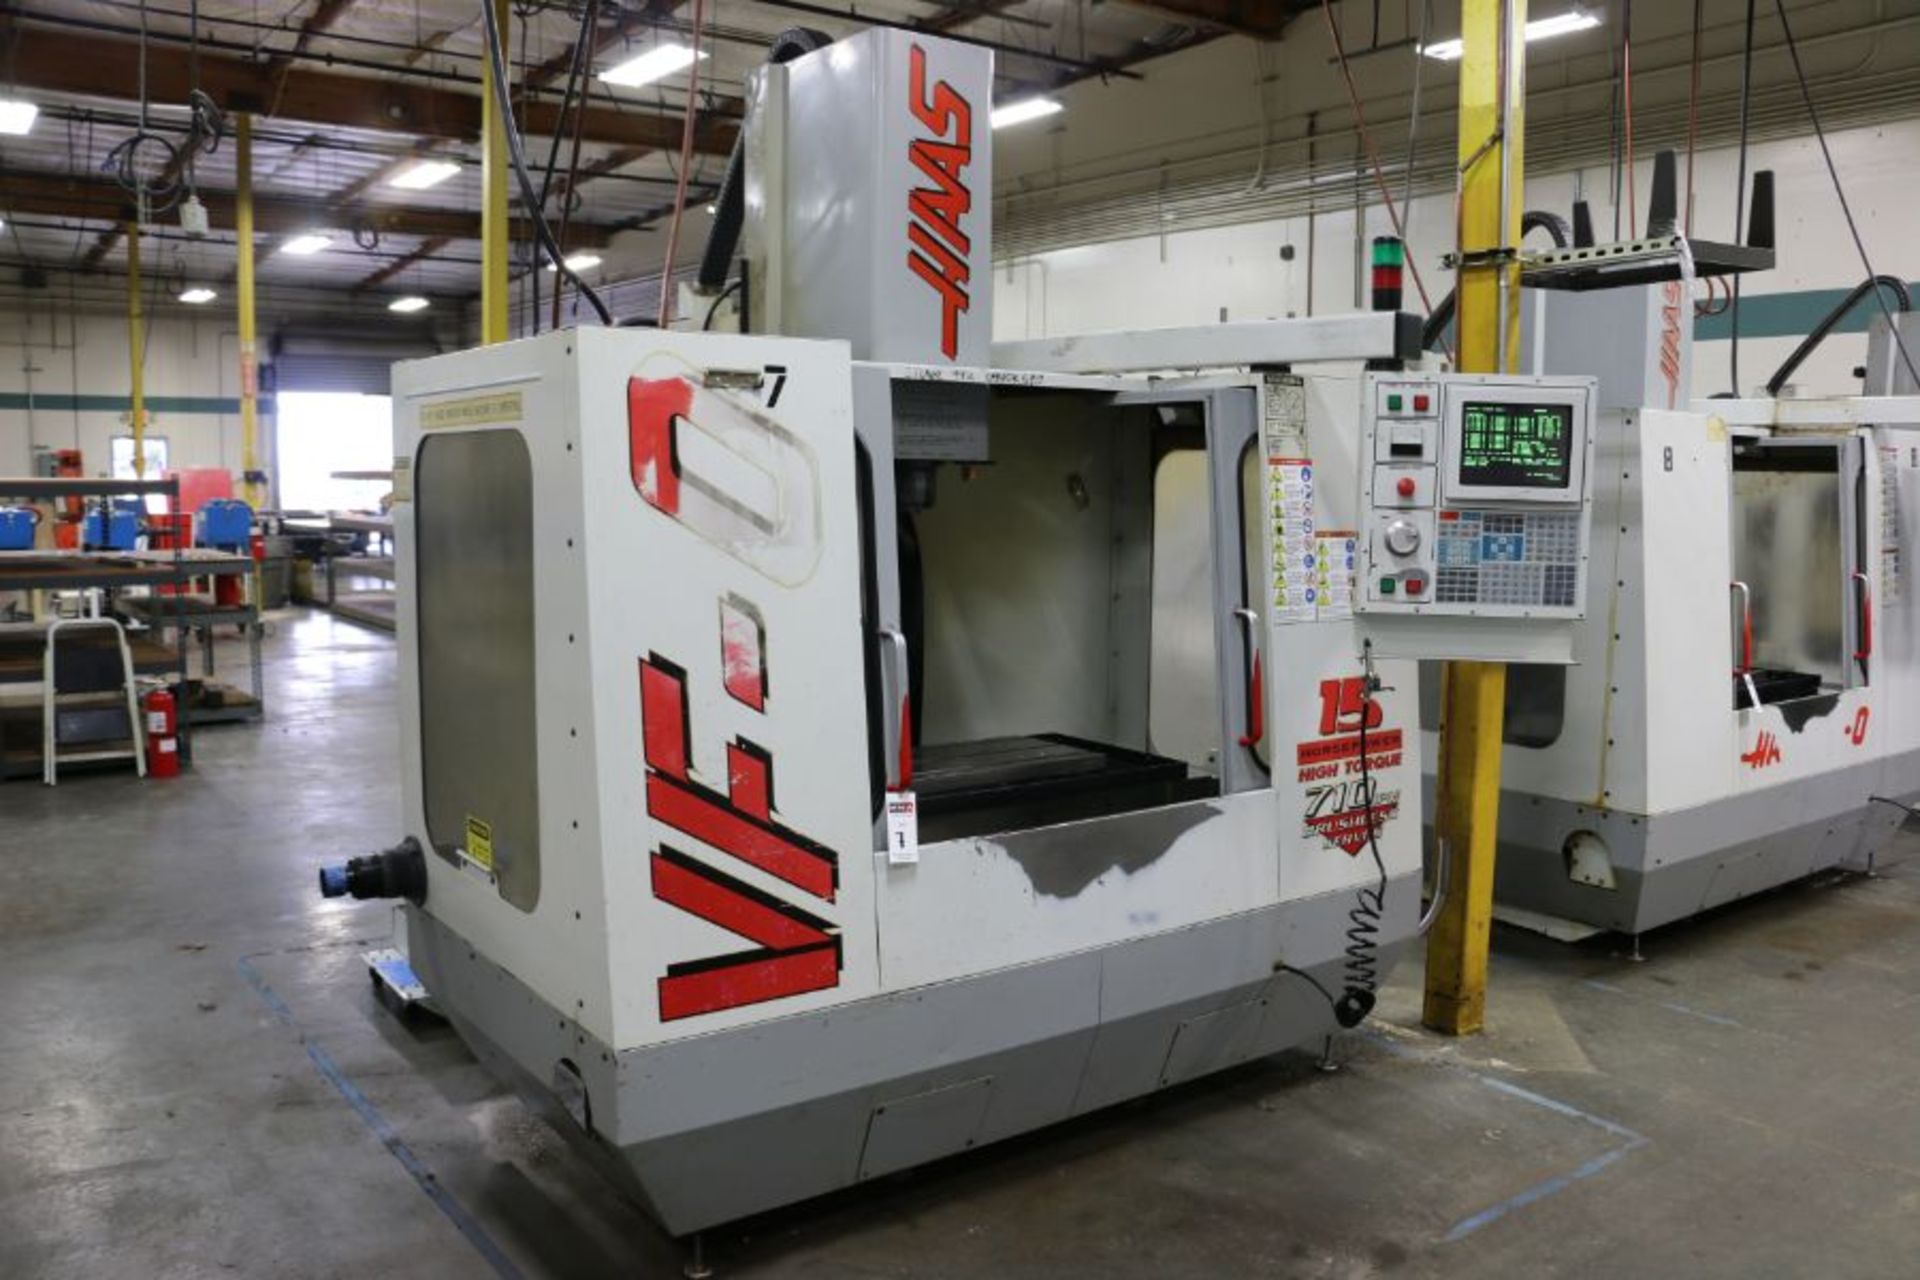 Haas VF-0, 20” x 16” x 20” Travels, 20 Position Tool Carousel, CT-40 Taper, s/n 11736, New 1997 - Image 5 of 12